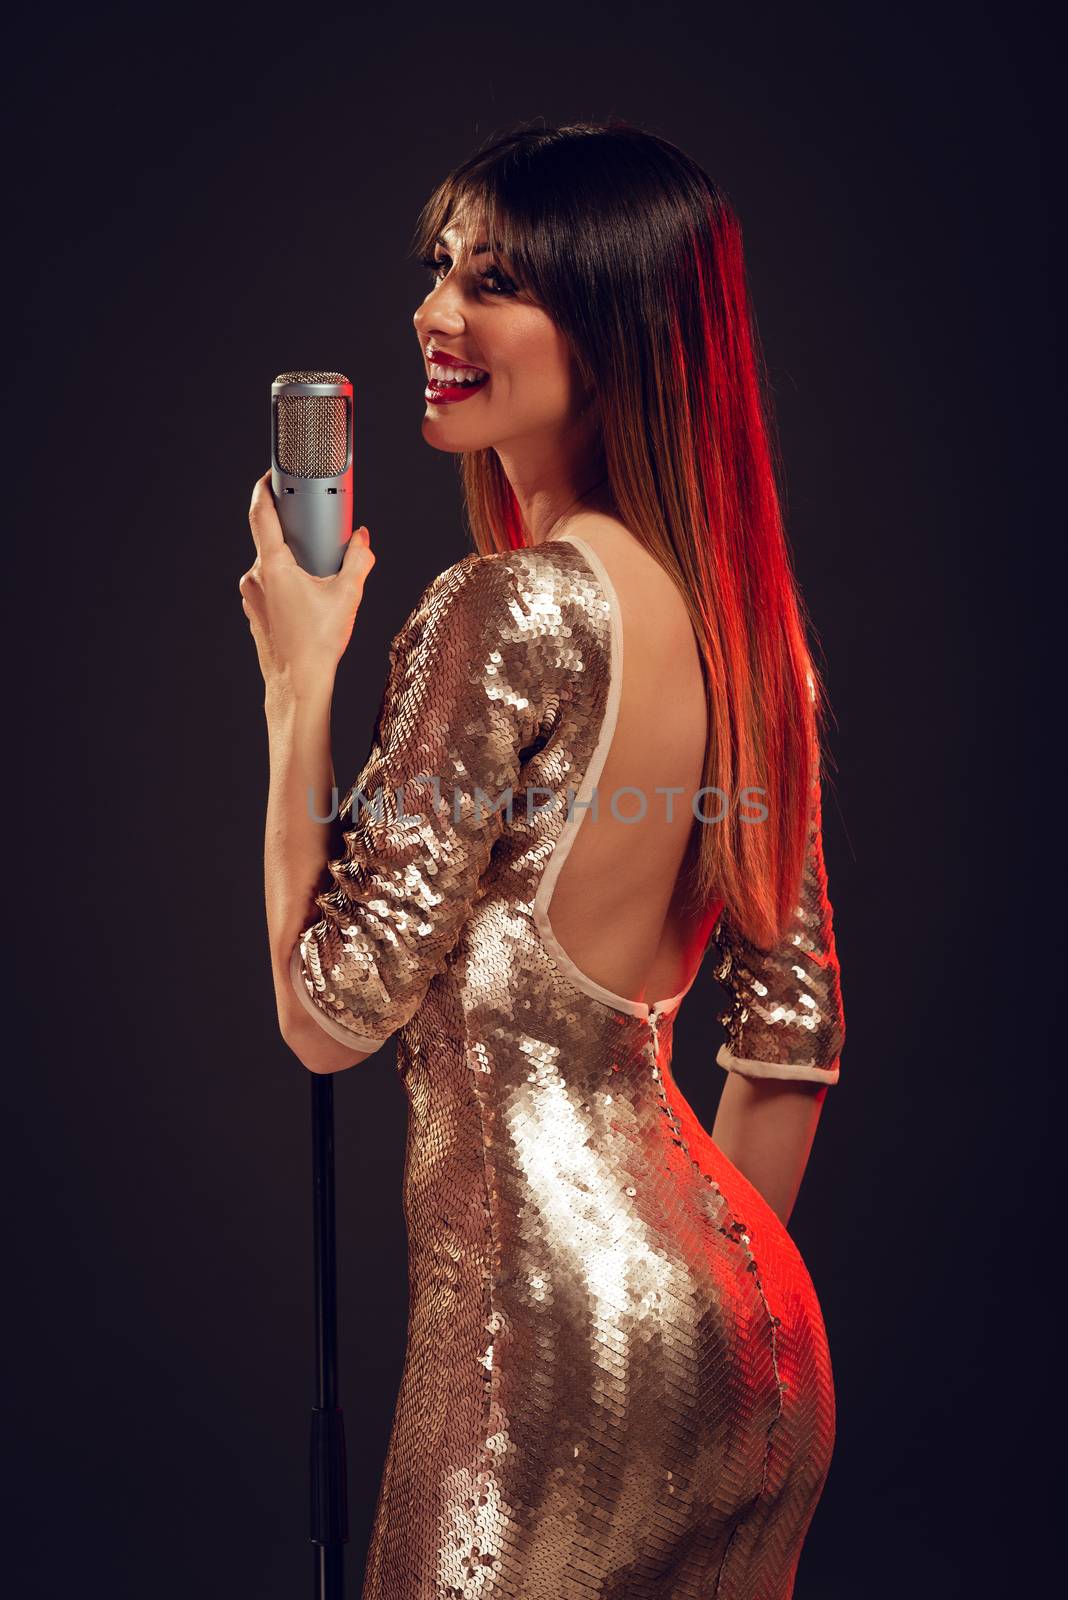 A young smiling woman in sequin dress singing in front of a microphone with expression of happiness on her face.